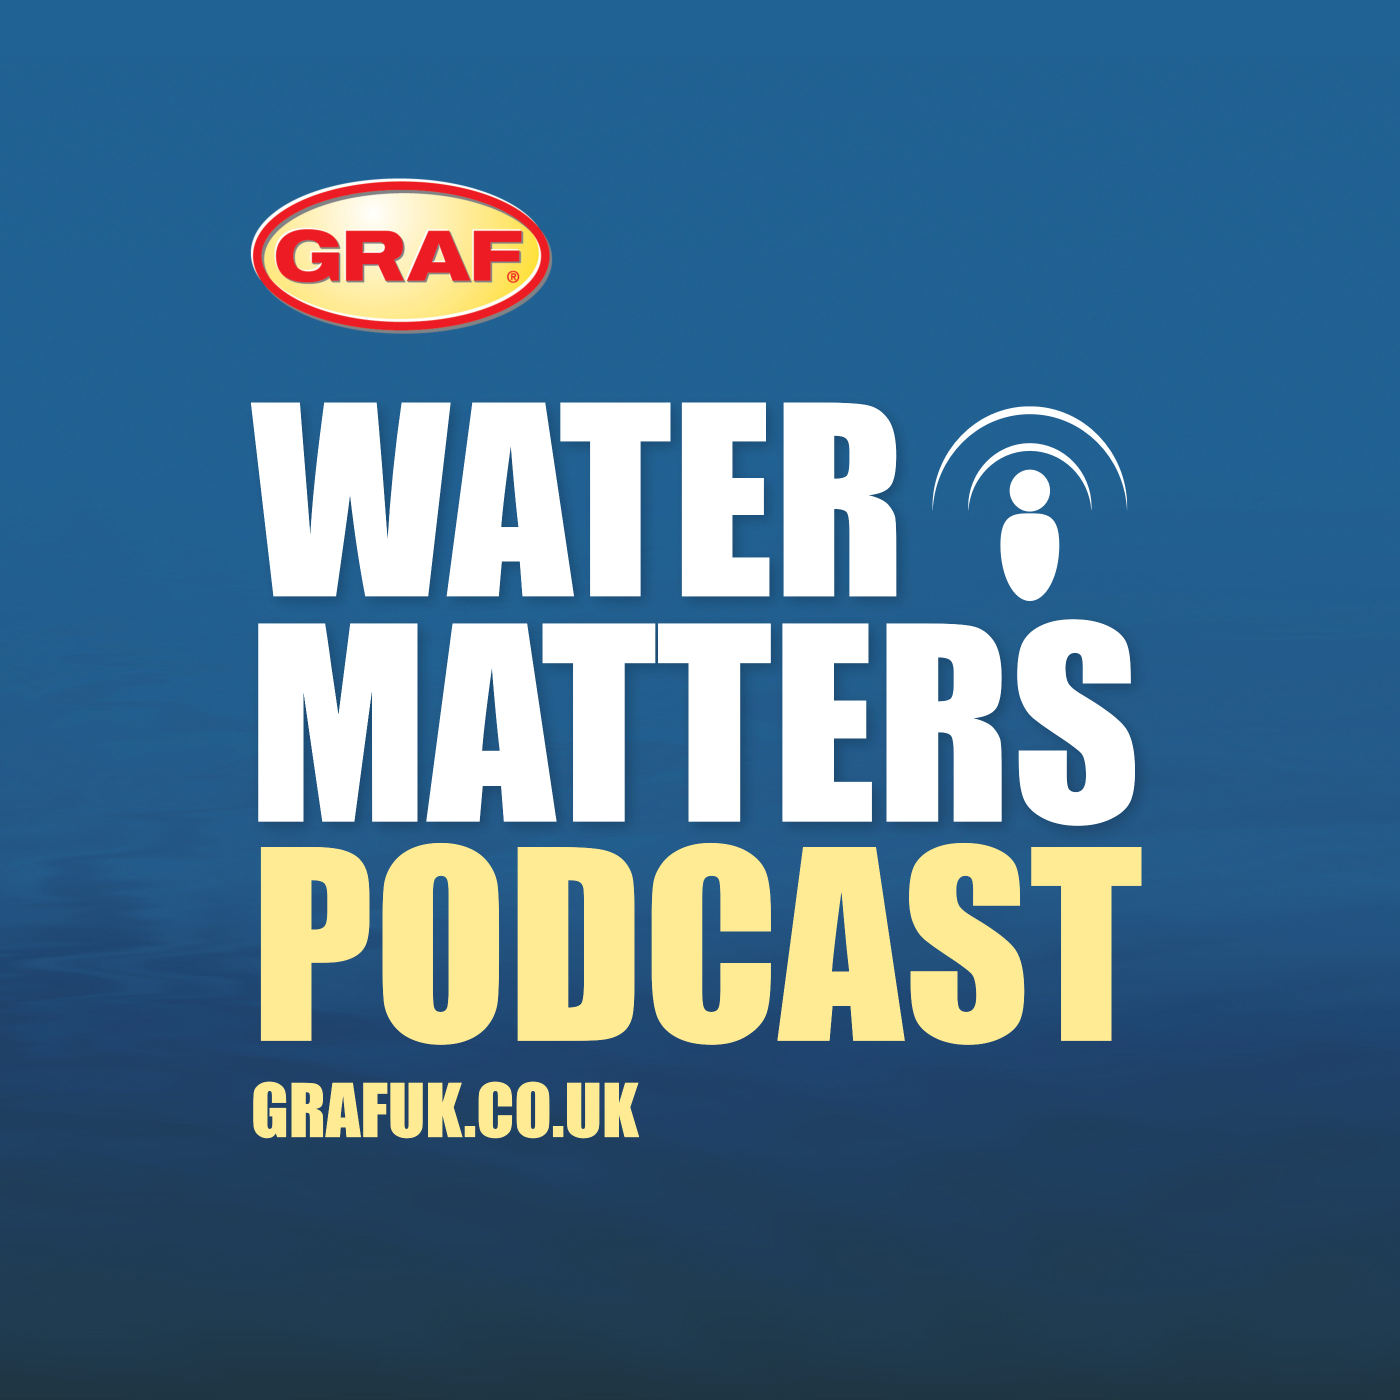 GRAF UK Water Matters Podcast